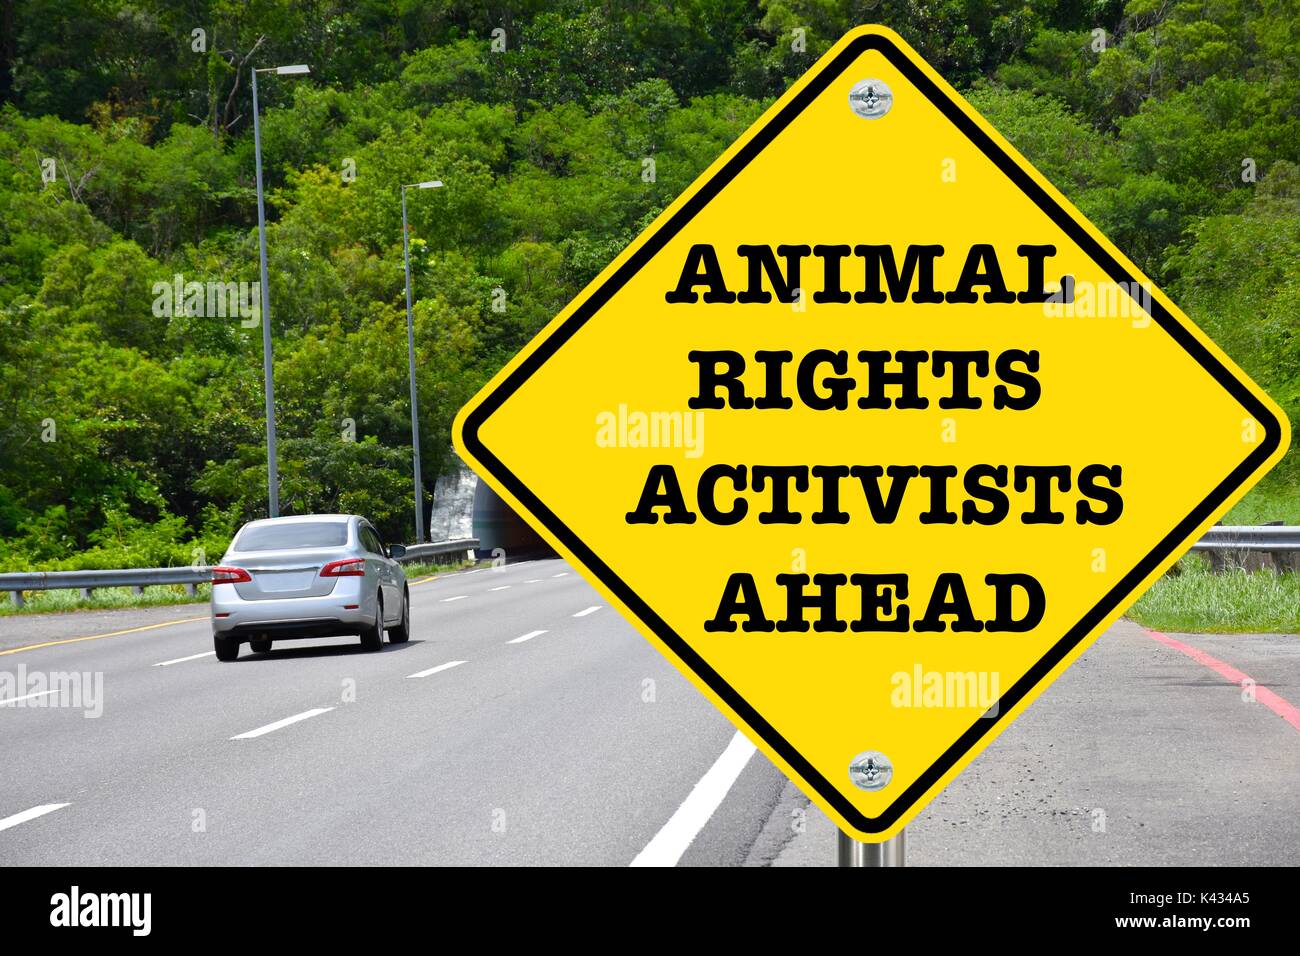 Animal rights activists ahead, road sign Stock Photo